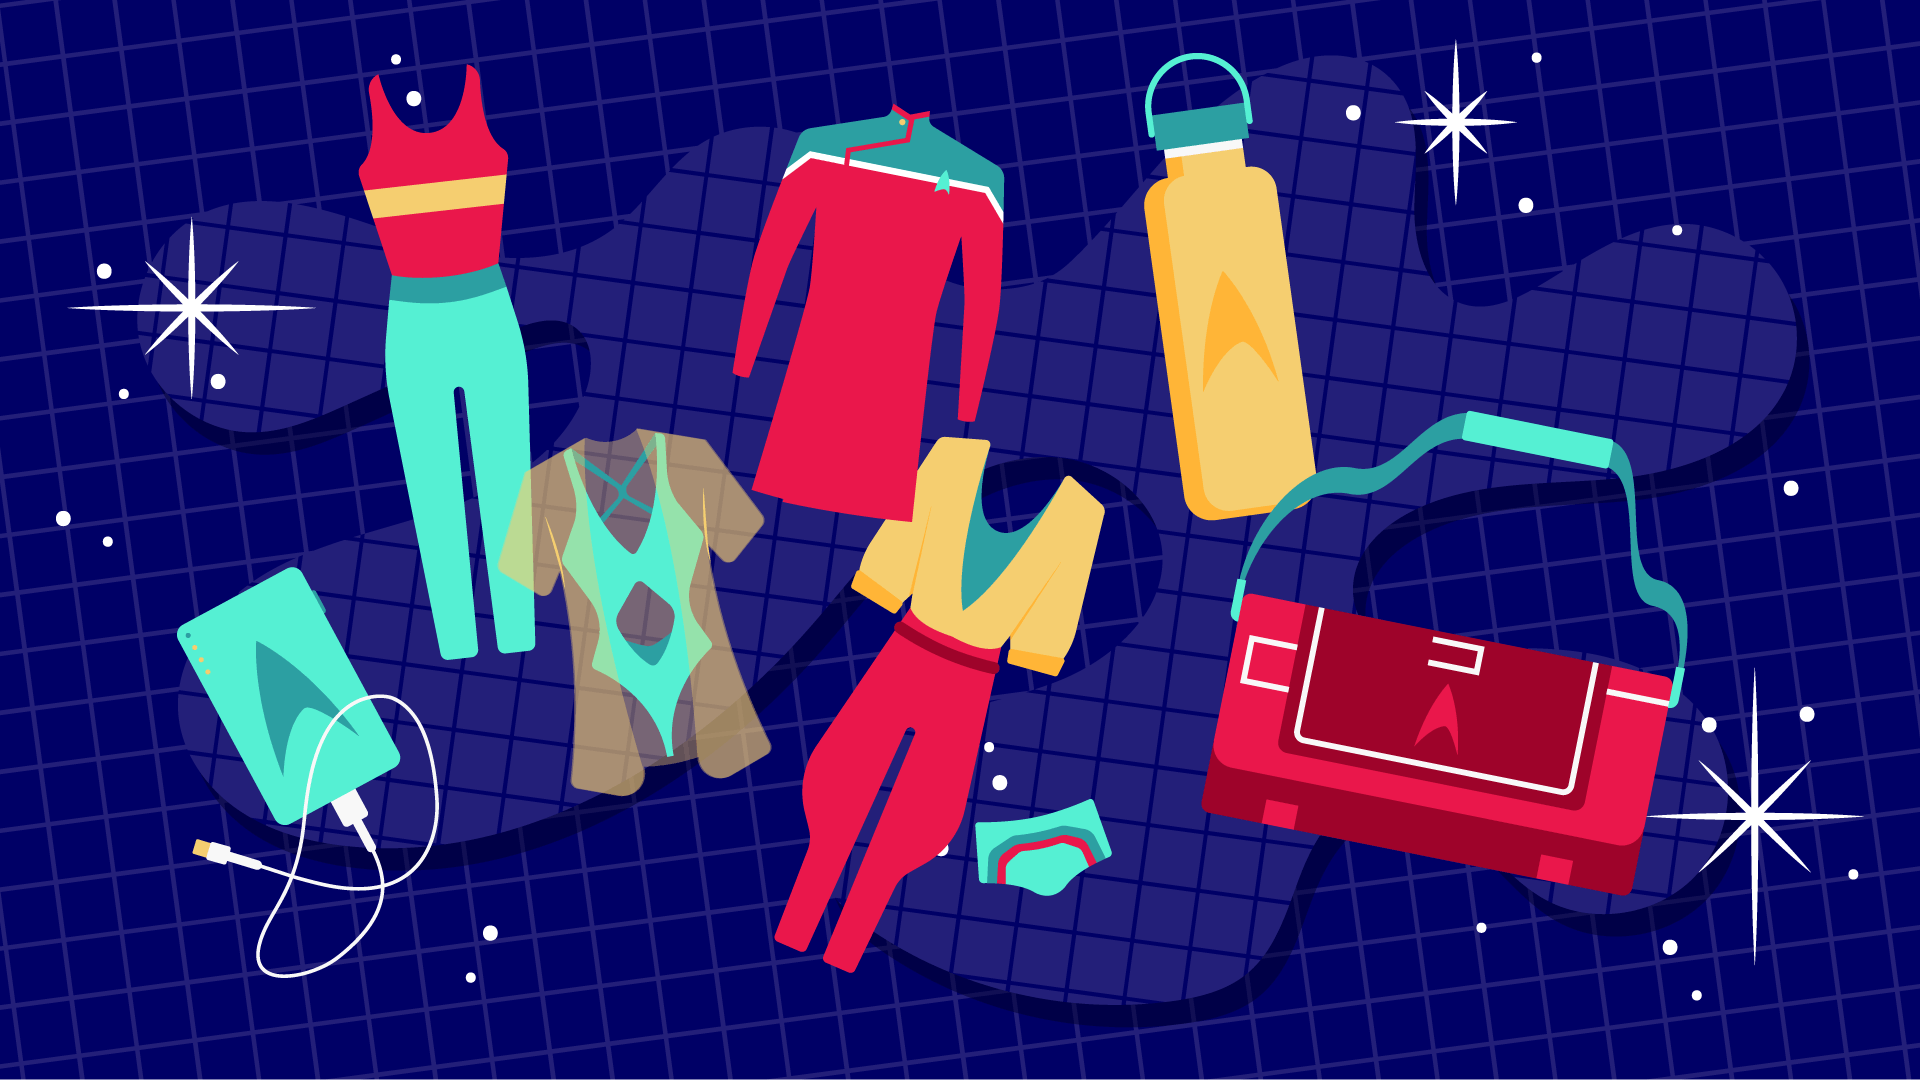 Graphic illustration of a portable charger with a delta, civilian attire, Starfleet skant, a pair of swim trunks, a reusable water bottle, and duffle bag